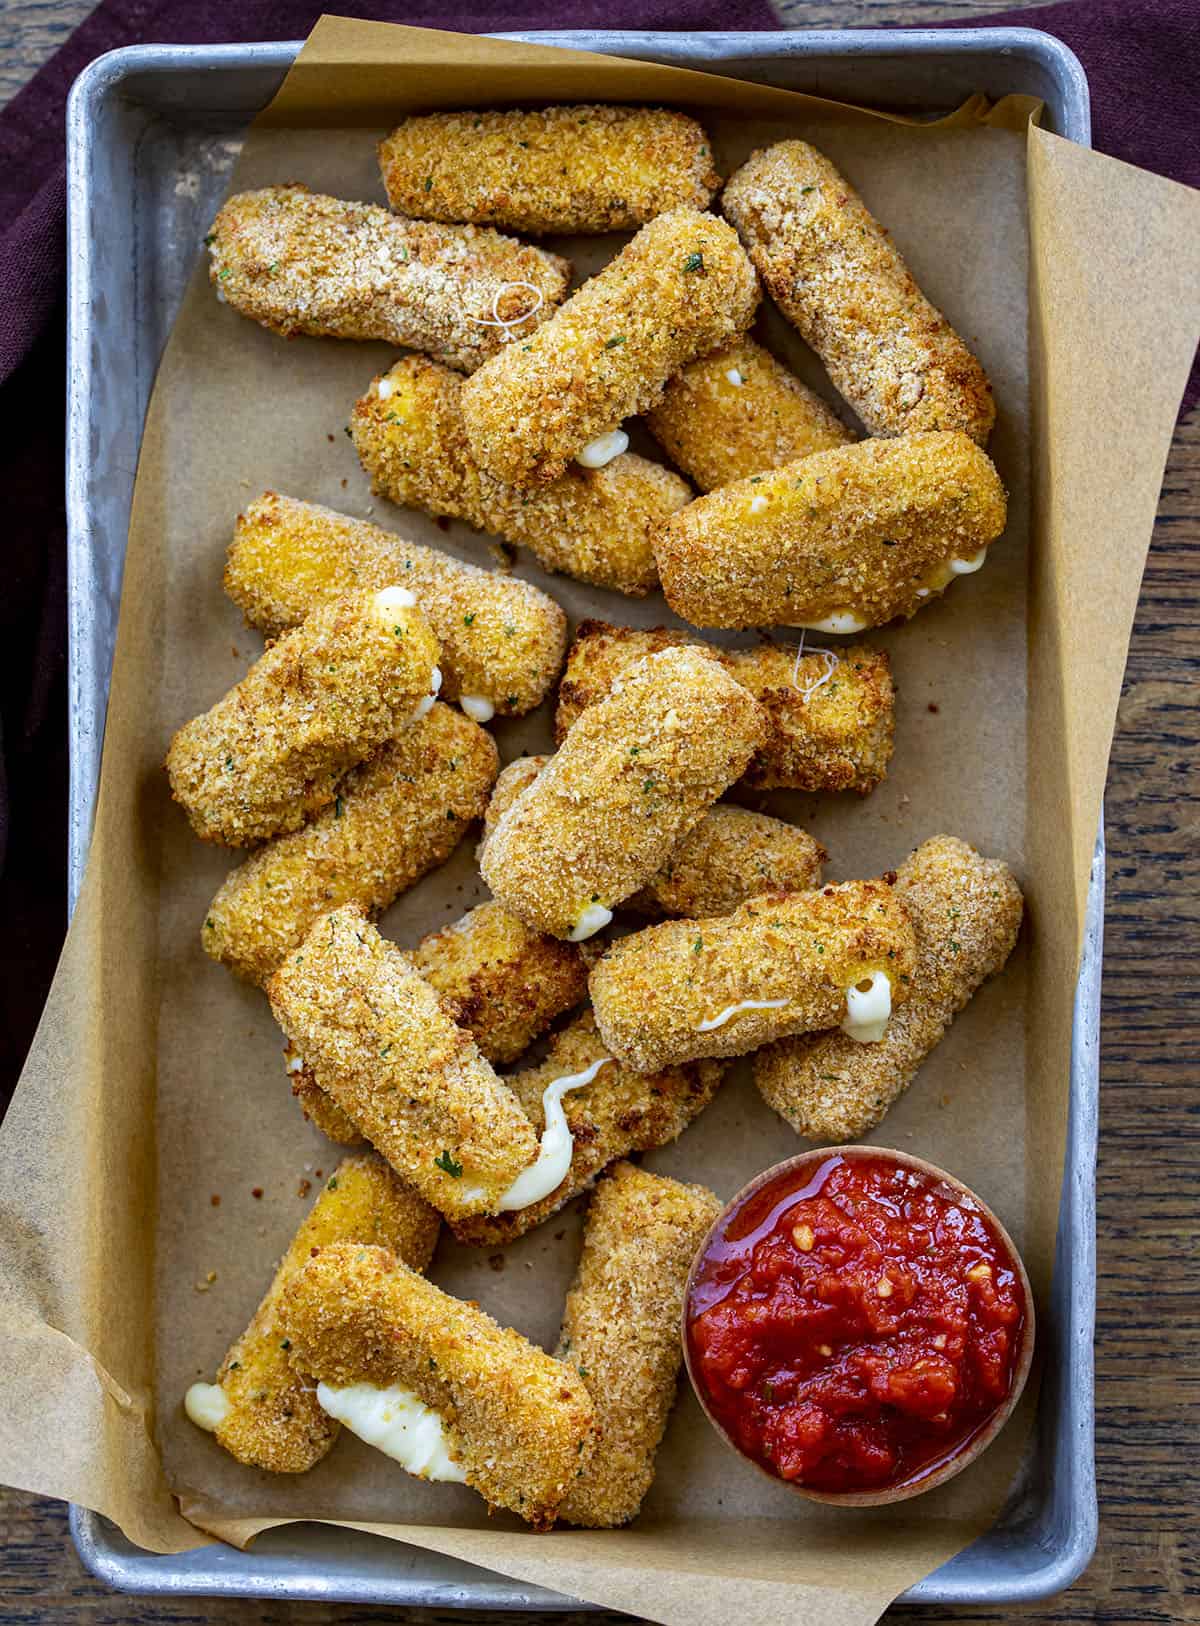 Pan of Air Fried Mozzarella Sticks with Marinara. Appetizers, Cheese Sticks, How to Make Cheese Sticks, How to Make Mozzarella Sticks, Superbowl Food, Football Appetizers, Easy Appetizers, Air Fryer Appetizers, Hot Appetizers, i am homesteader, iamhomesteader